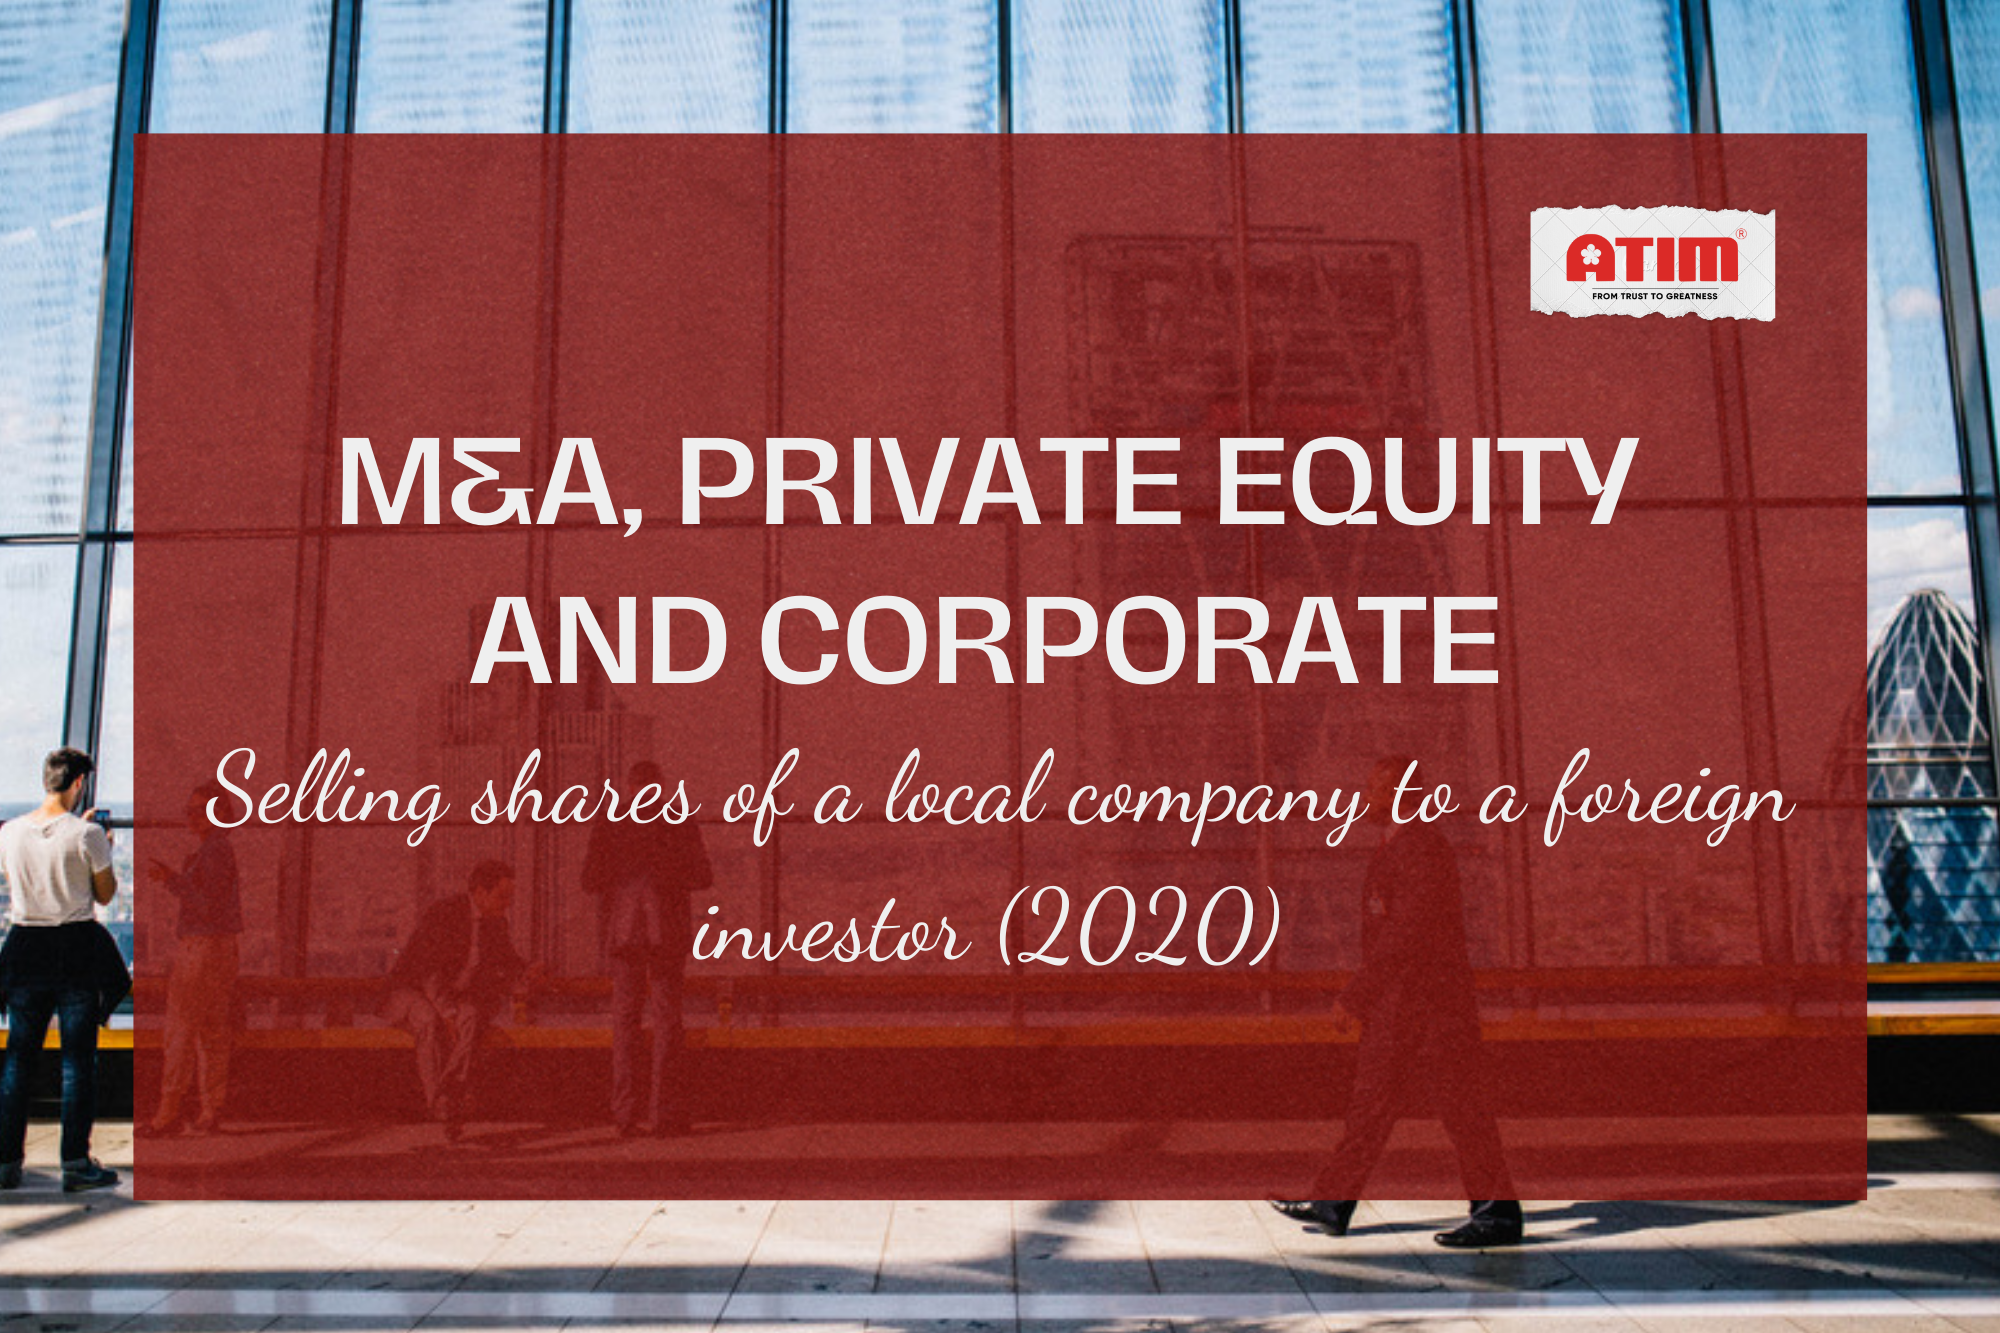 M&A, Private Equity and Corporate - Selling shares of a local company to a foreign investor